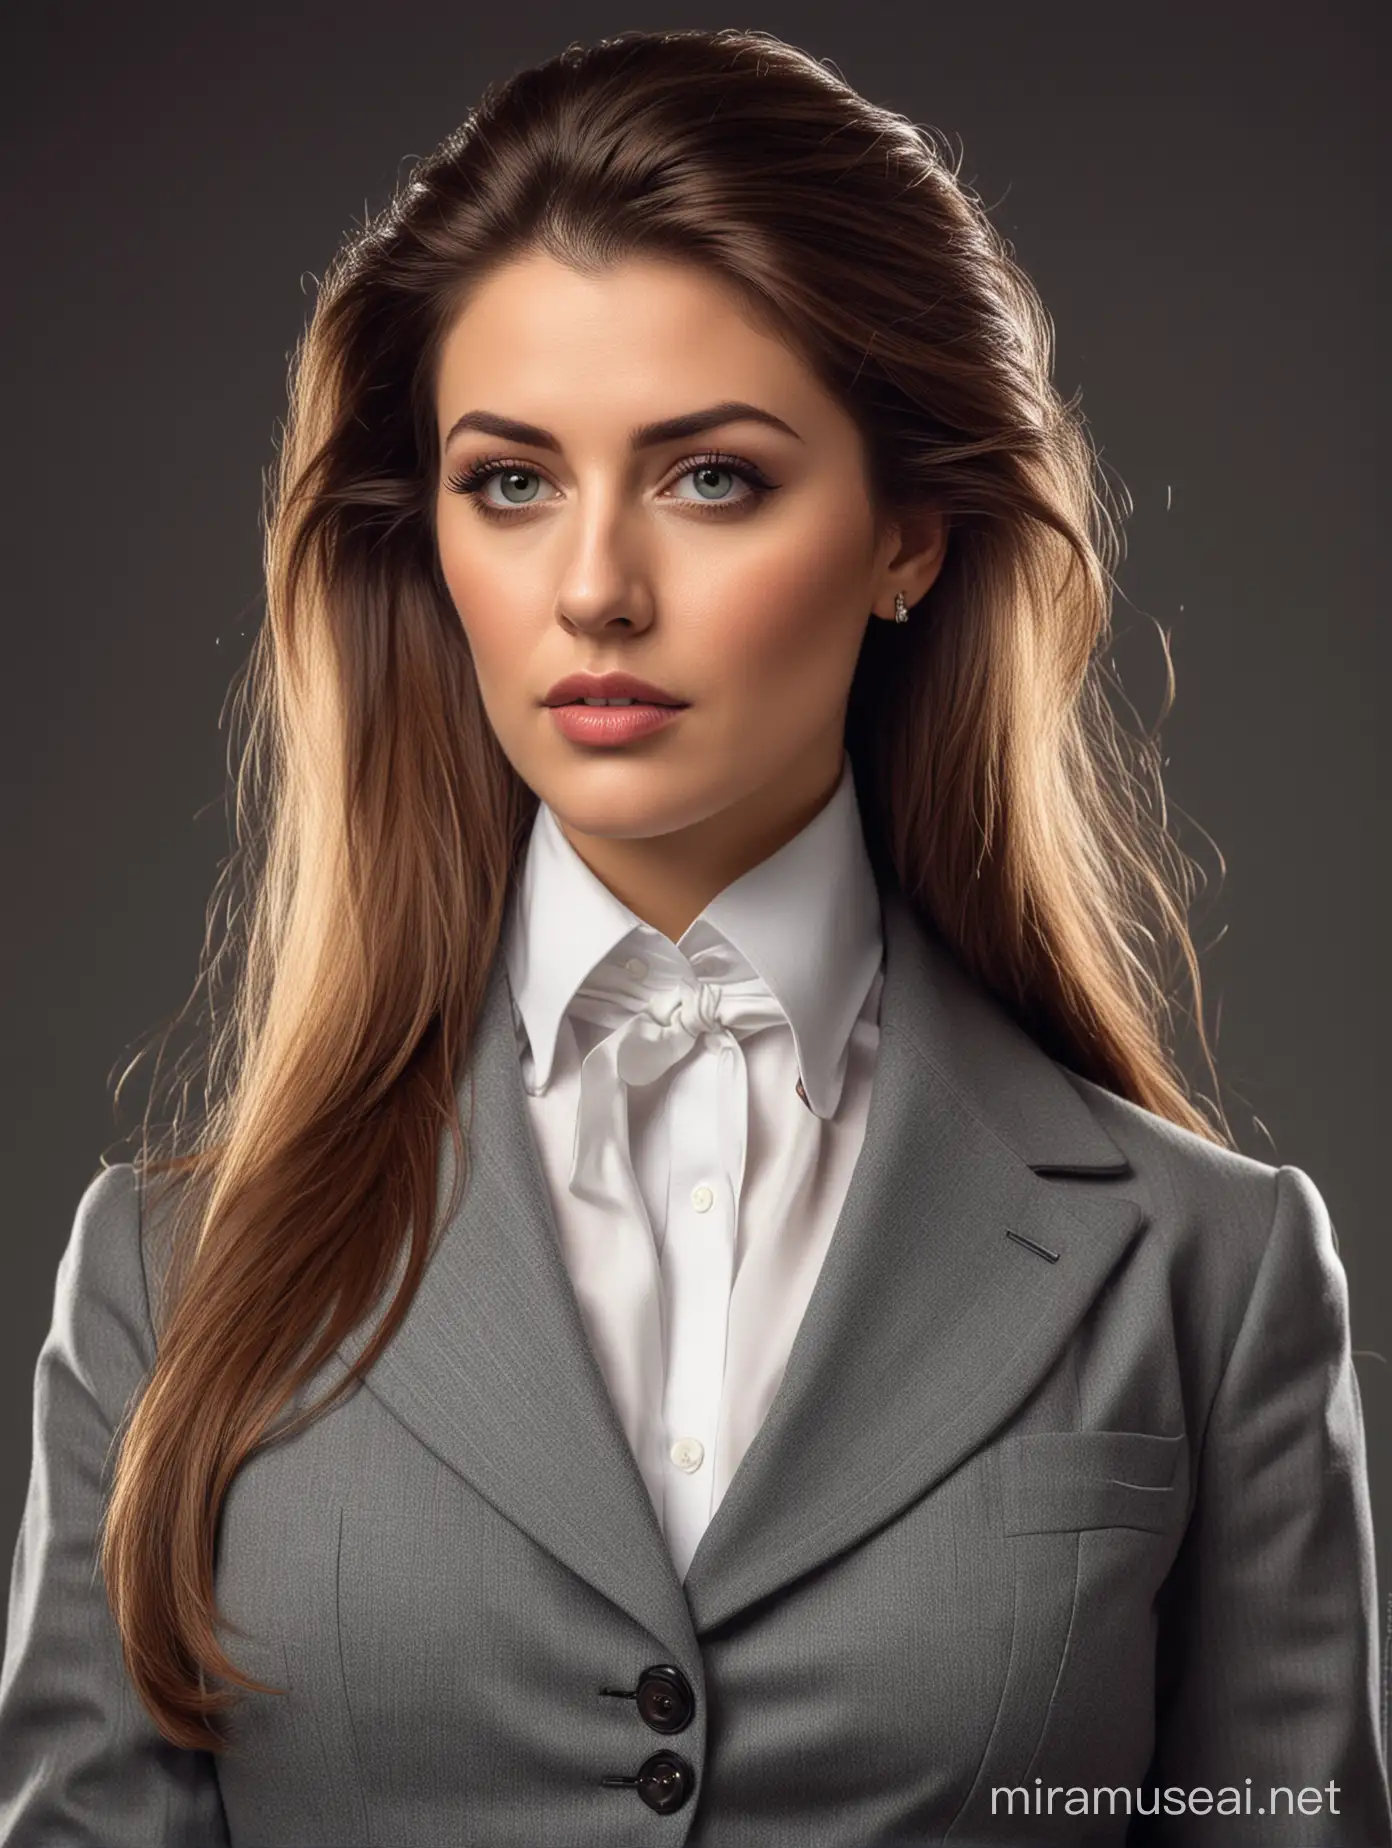 A big breasted lady with a beard and sideburns and long hair and a suit